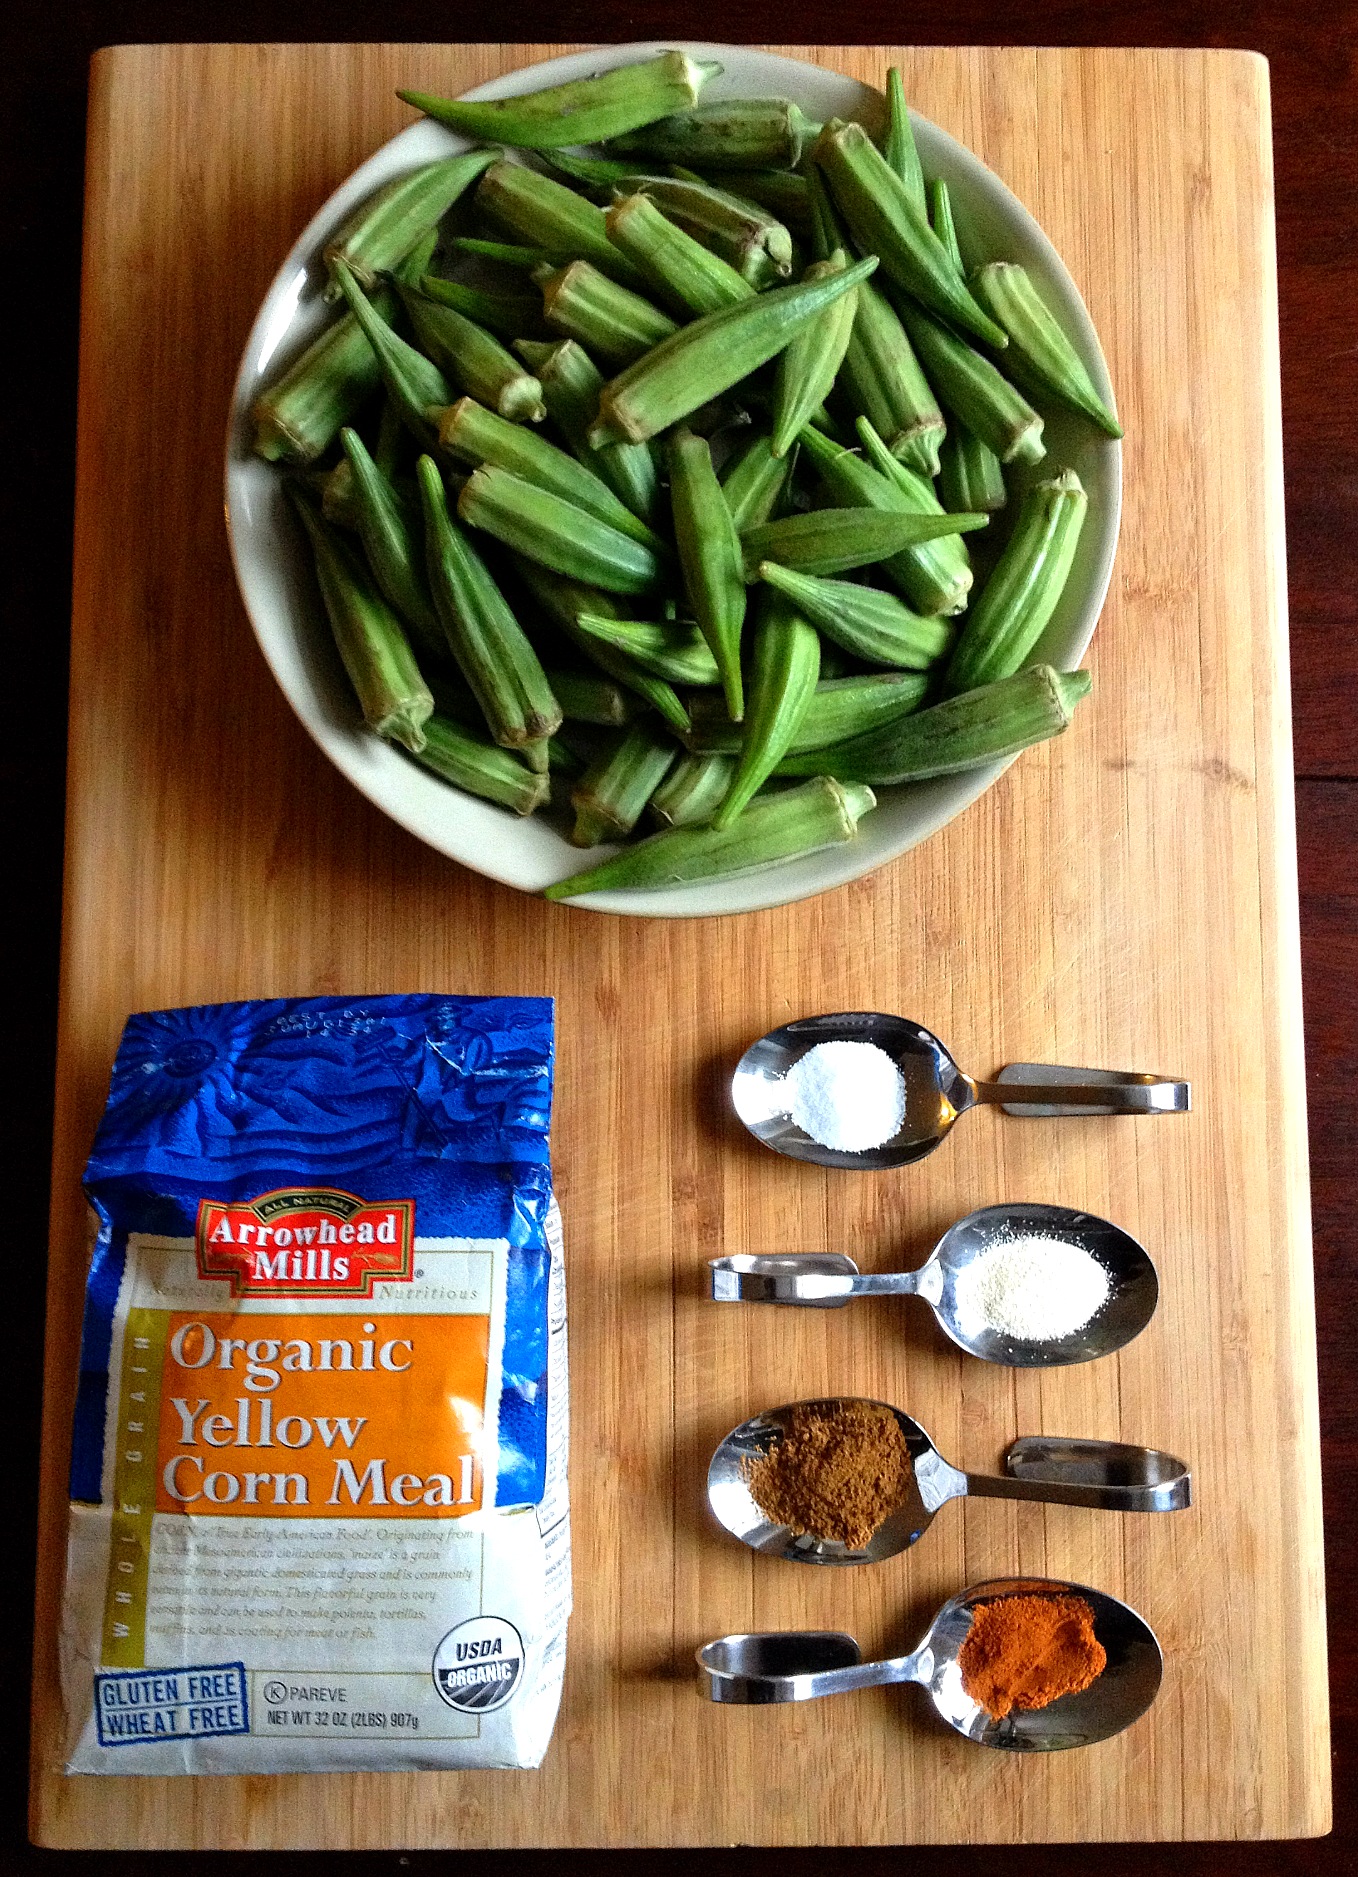 Ingredients for Indian okra dish